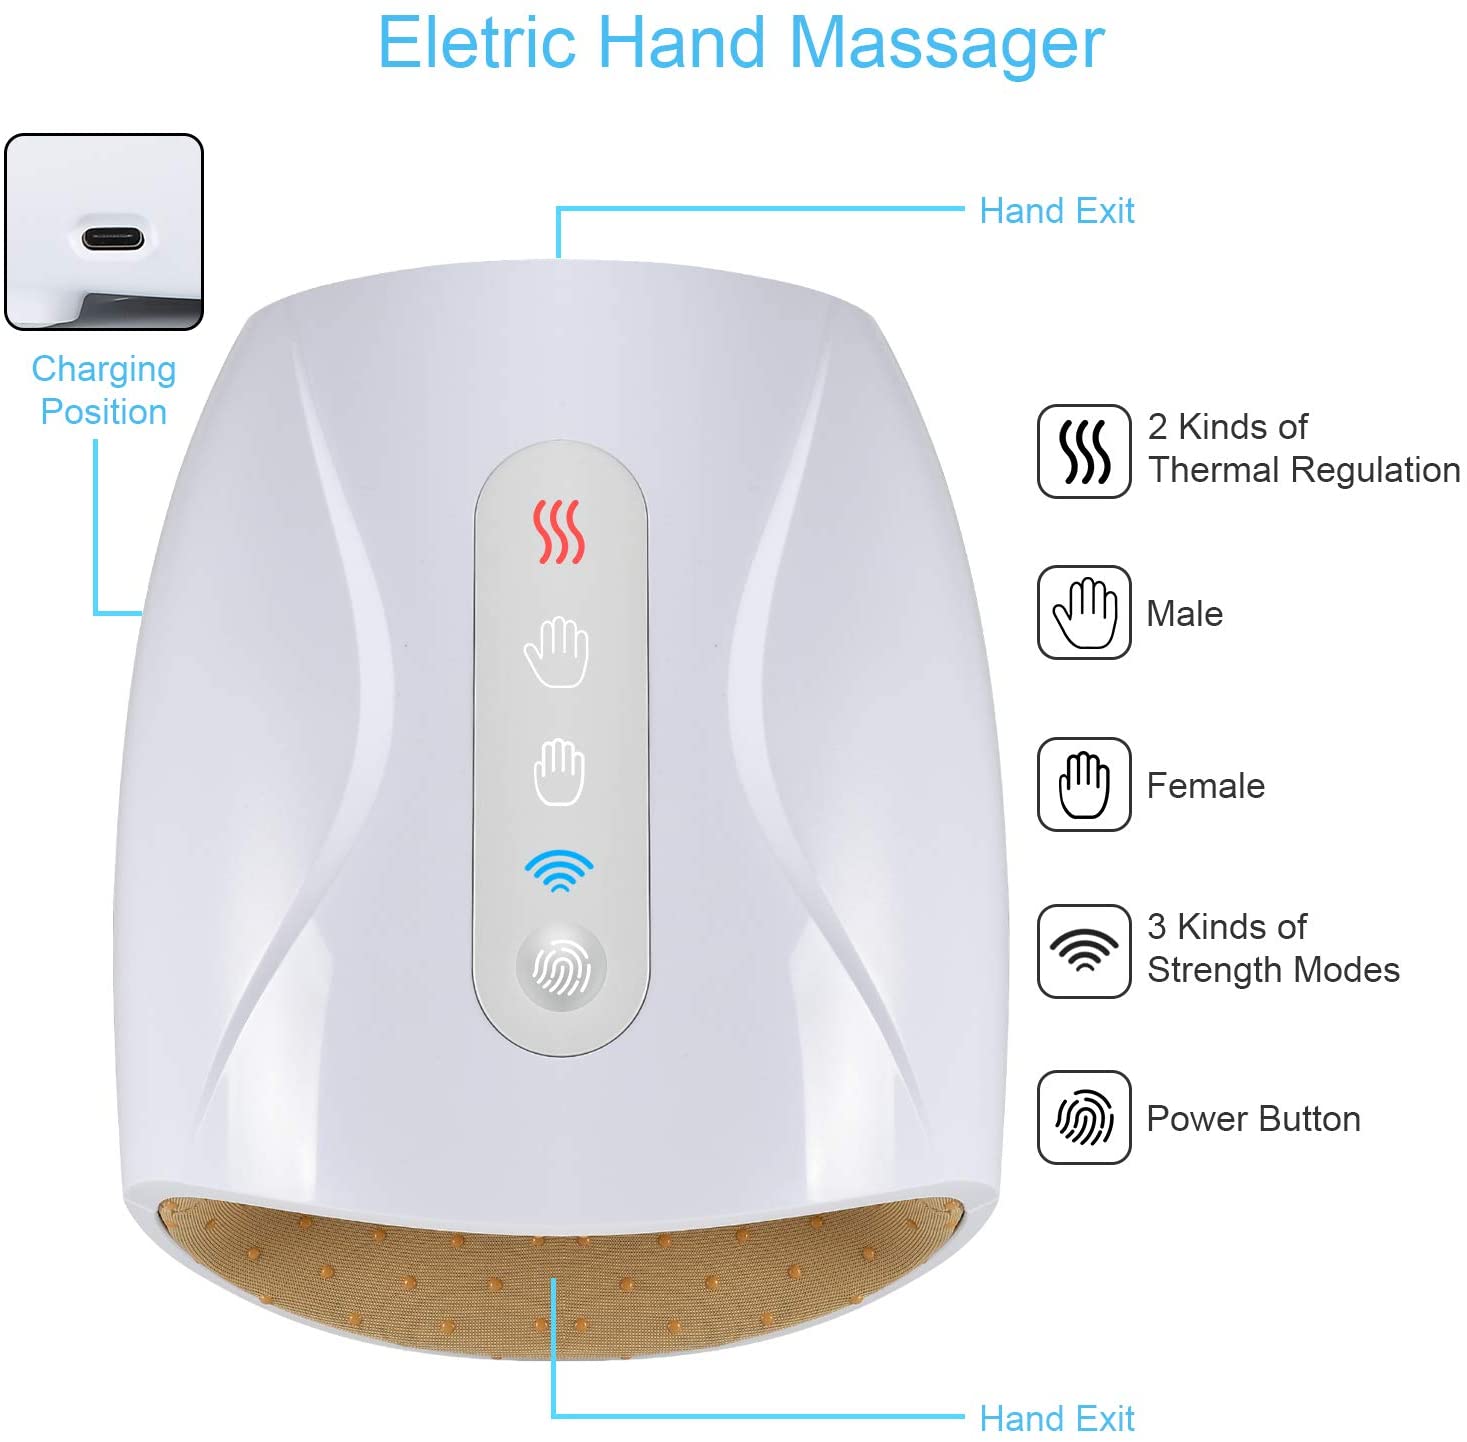 Cotsoco Electric Hand Massager for Palm Massage, Cordless